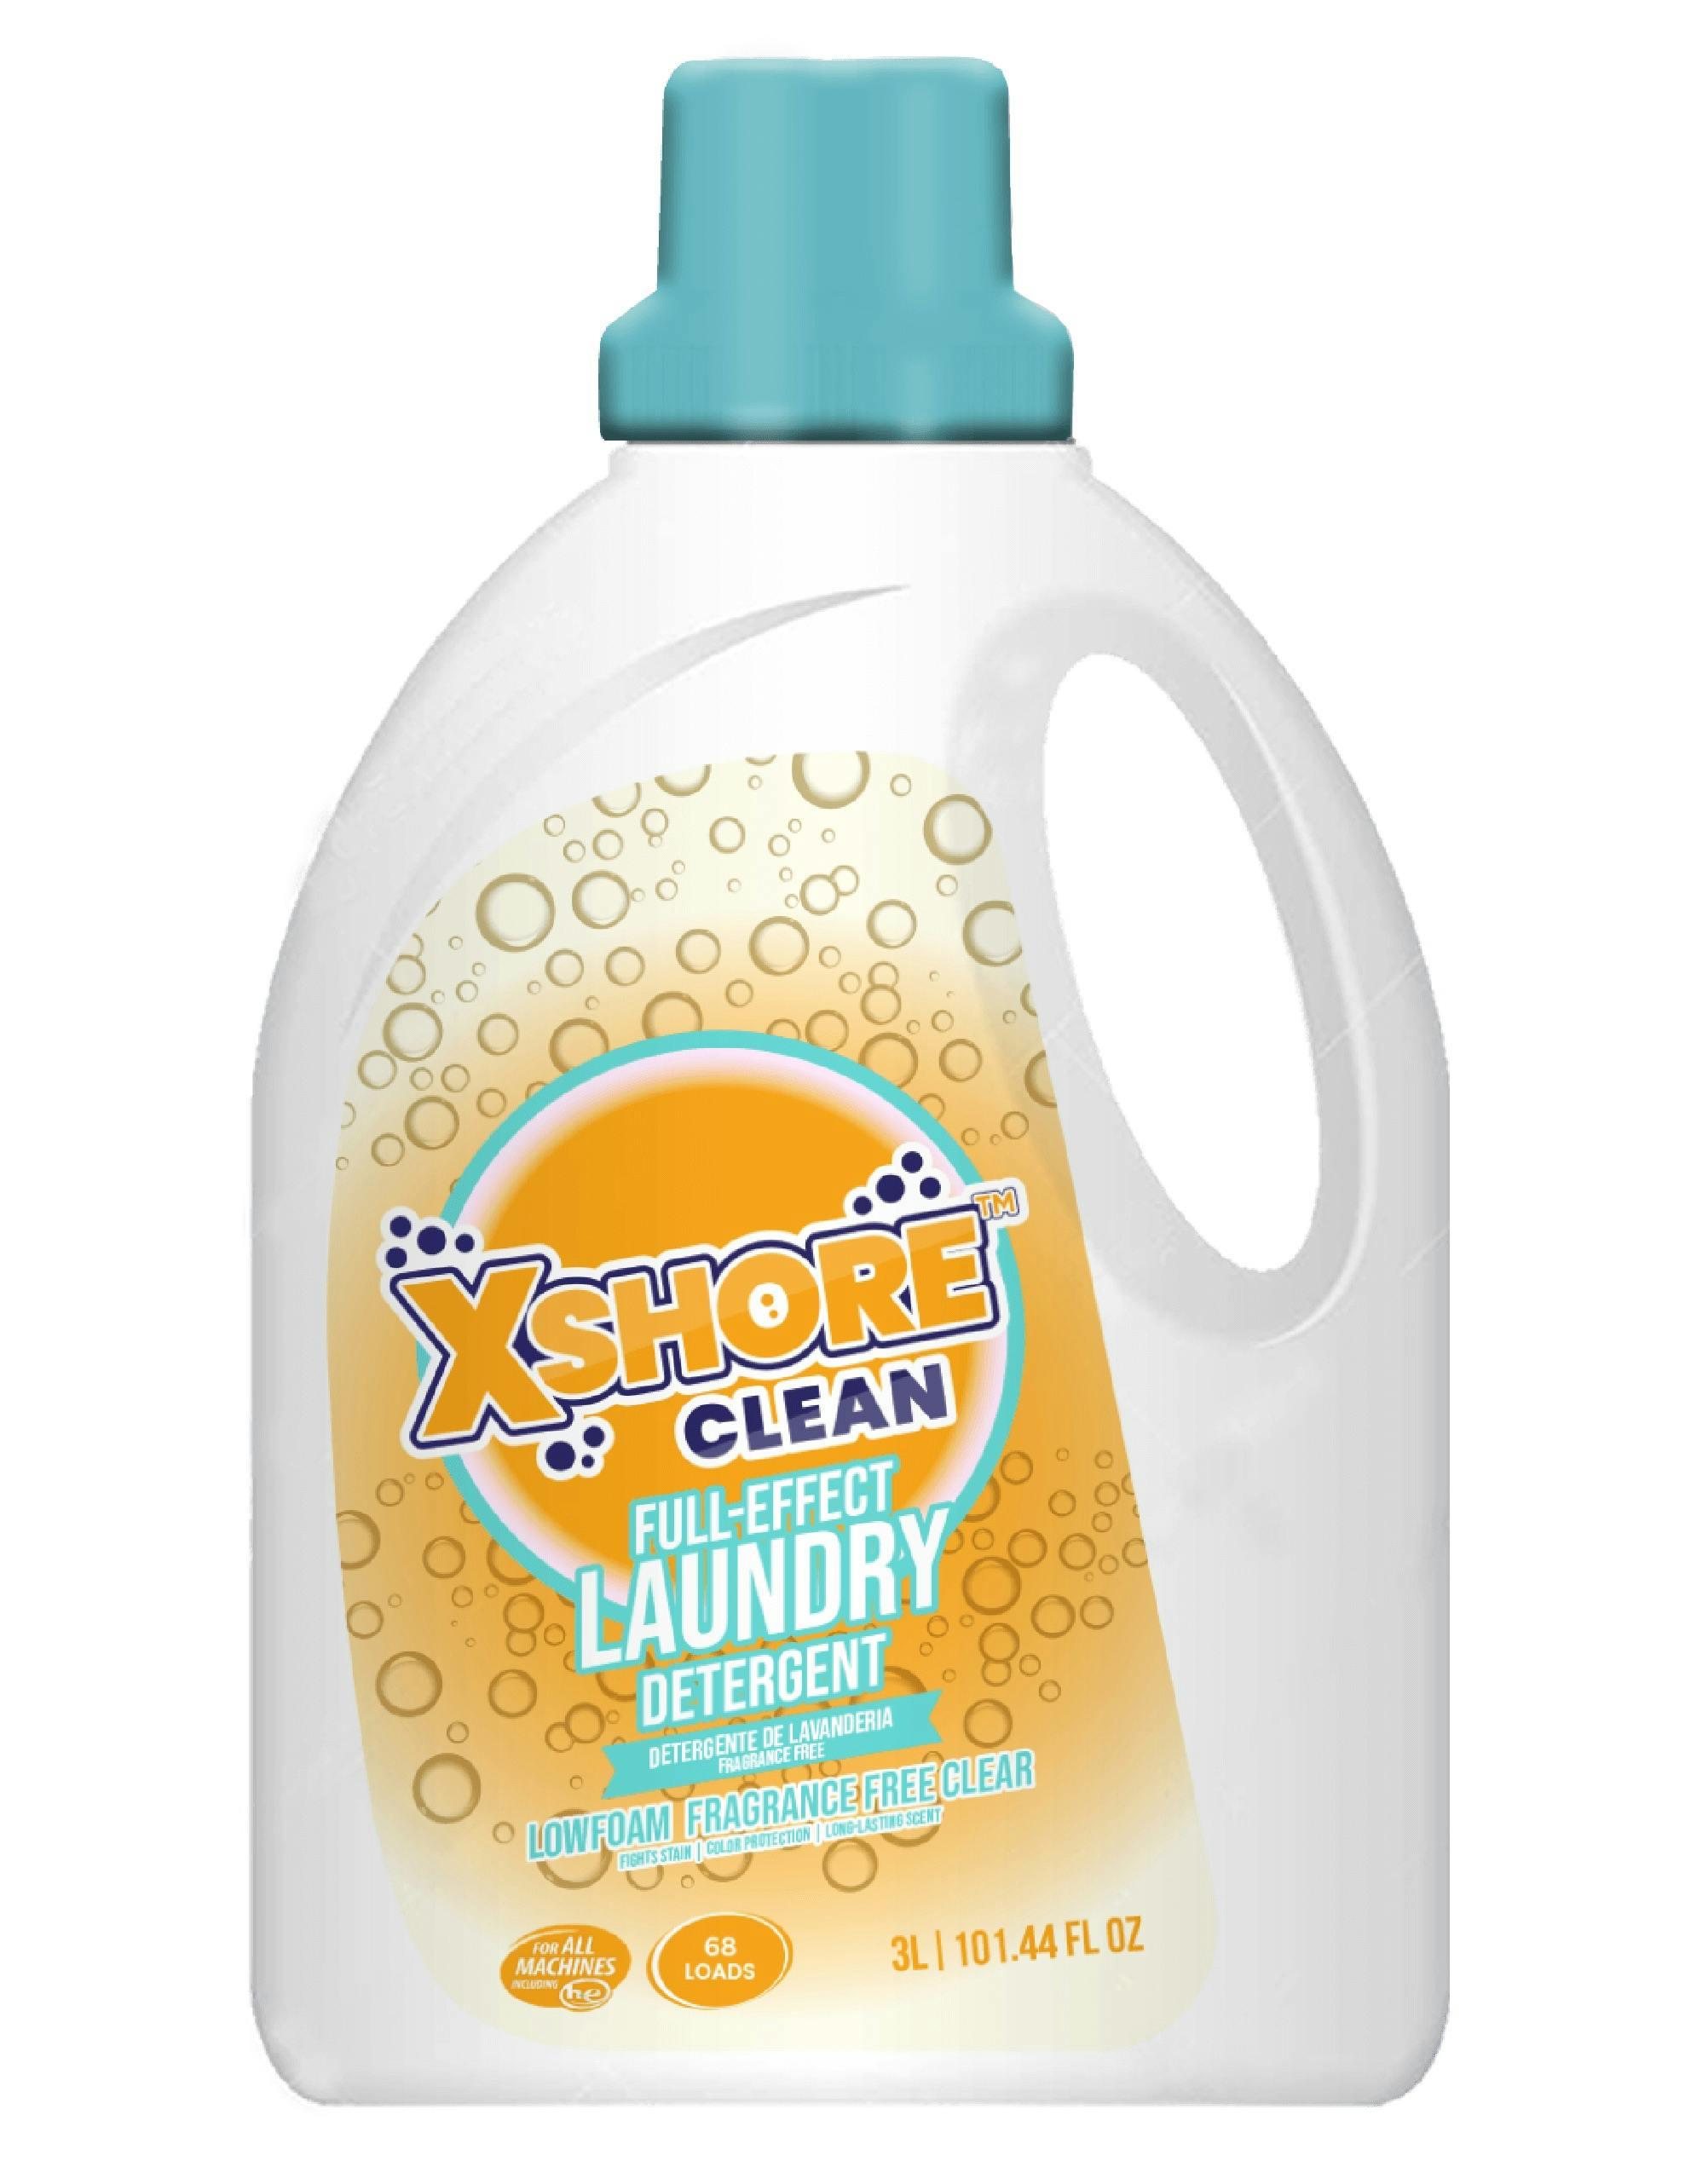 Fragrance Free-Clear Liquid Laundry Detergent 